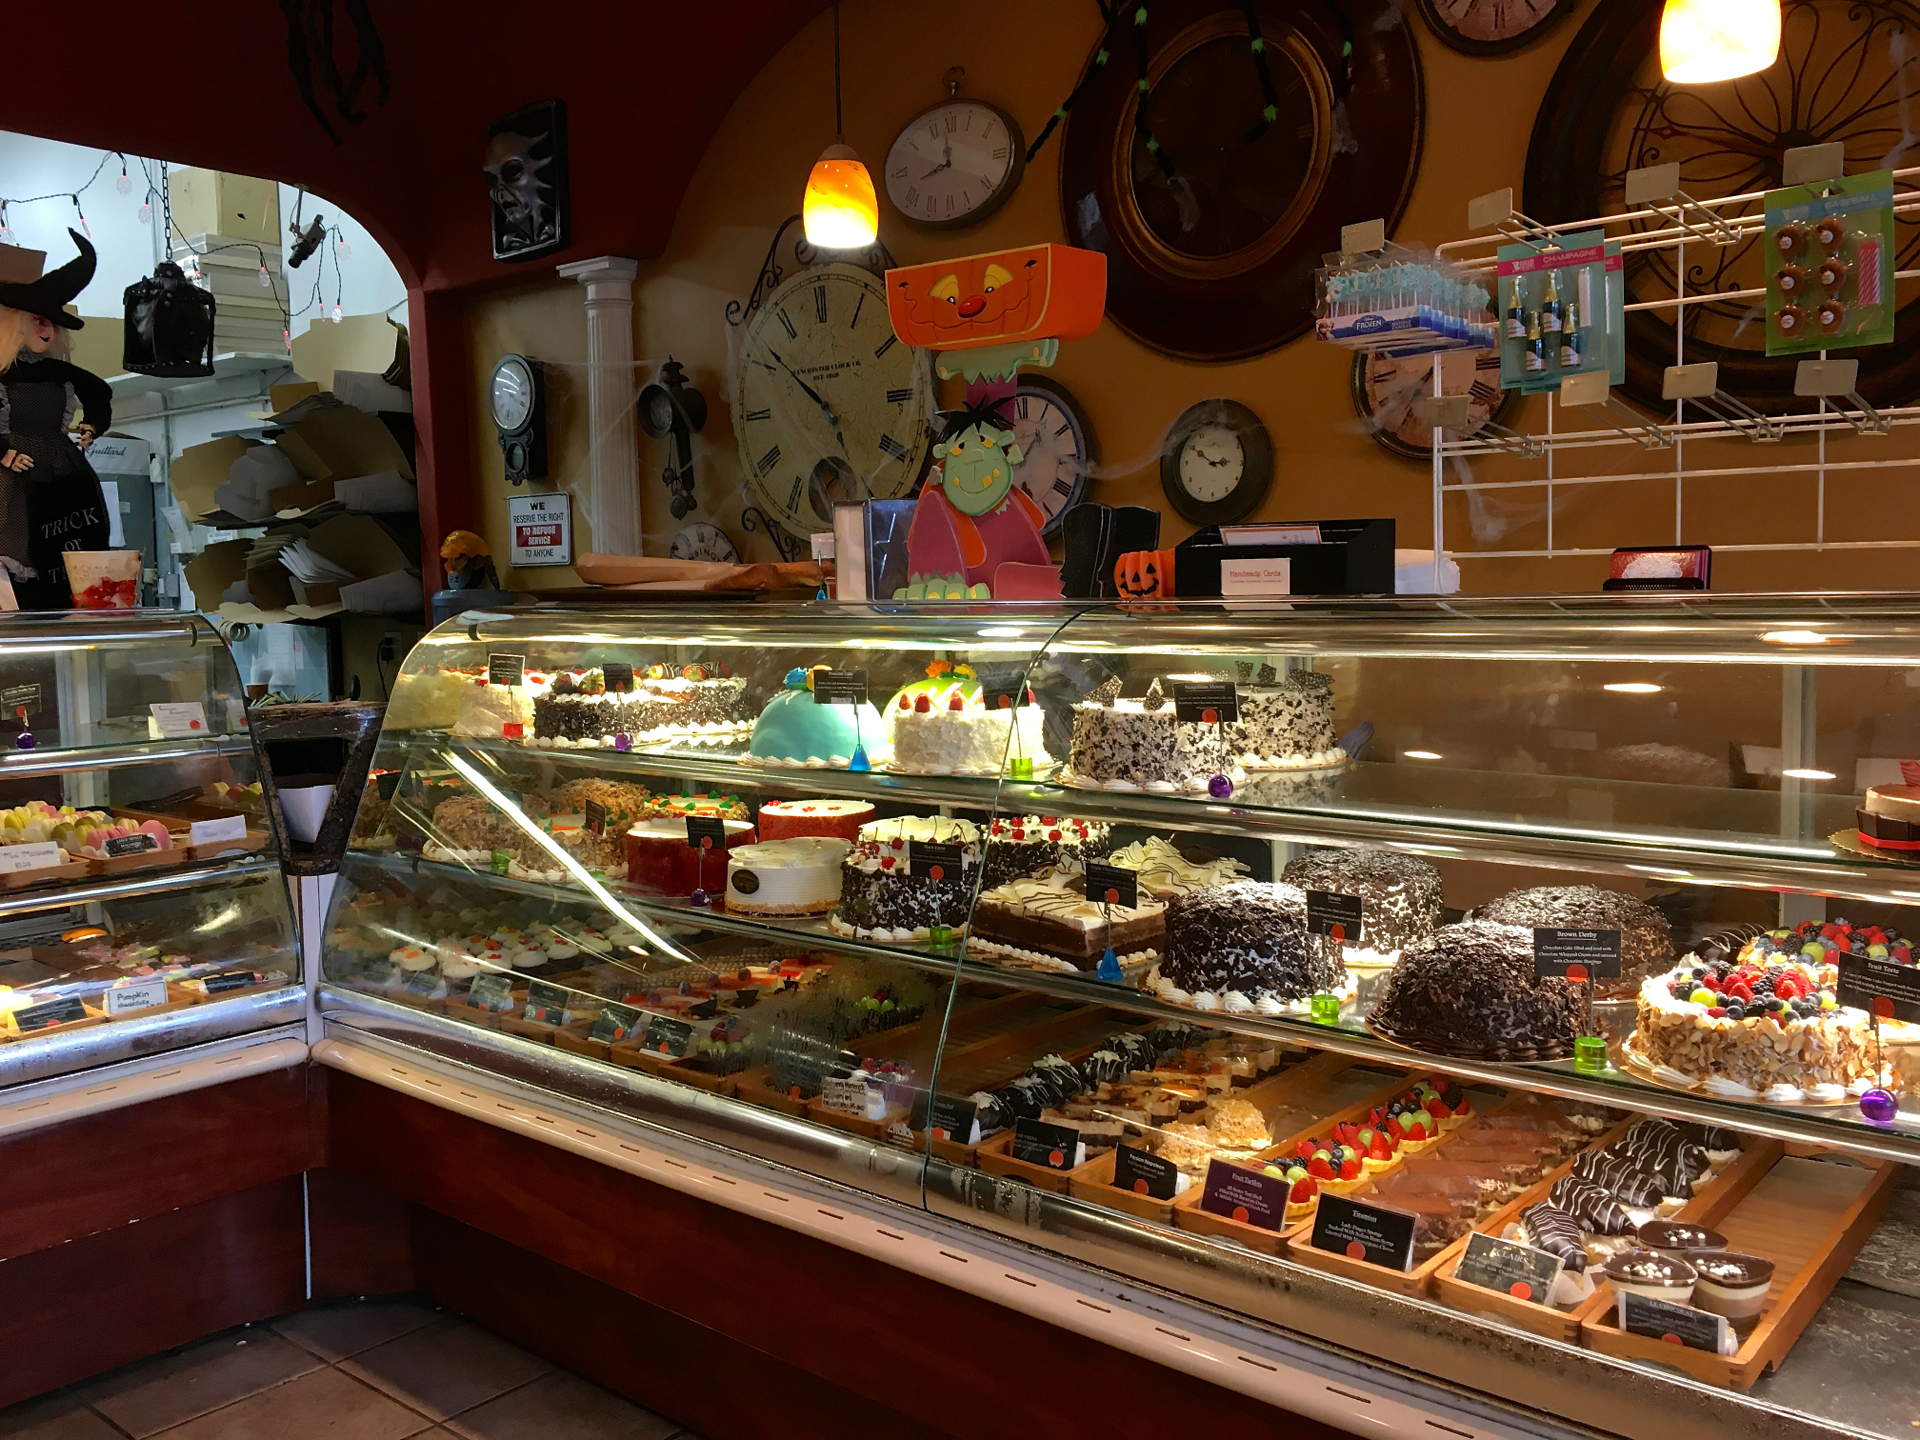 The pastry case inside La Patisserie Bakery in Cupertino.